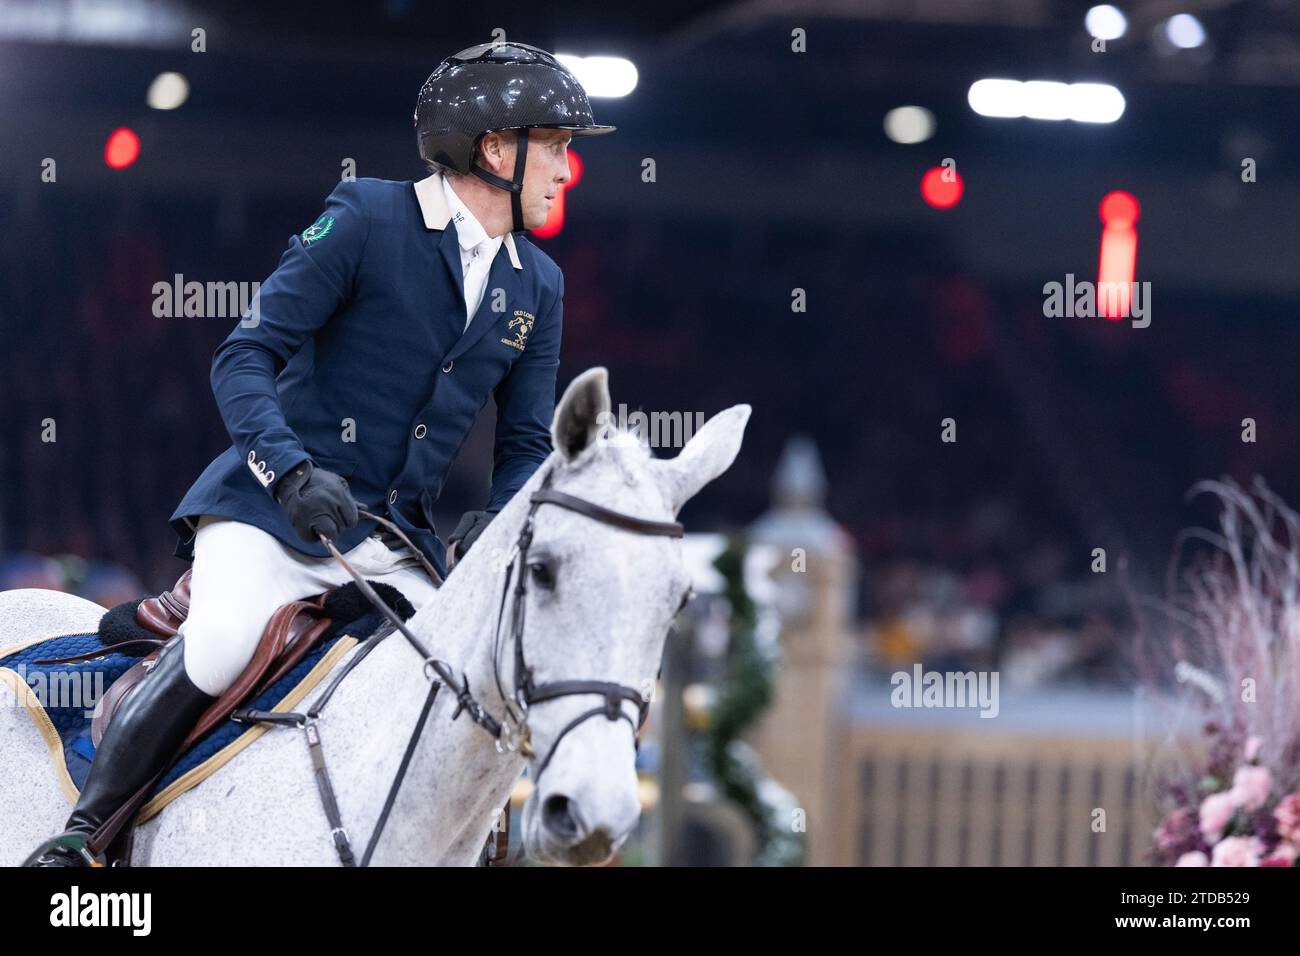 London, UK. December 17, 2023. Shane Breen of Ireland with Haya competing during the Longines FEI Jumping World Cup at the London International Horse Show on December 17, 2023, London Excel Centre, United Kingdom (Photo by Maxime David - MXIMD Pictures) Credit: MXIMD Pictures/Alamy Live News Stock Photo